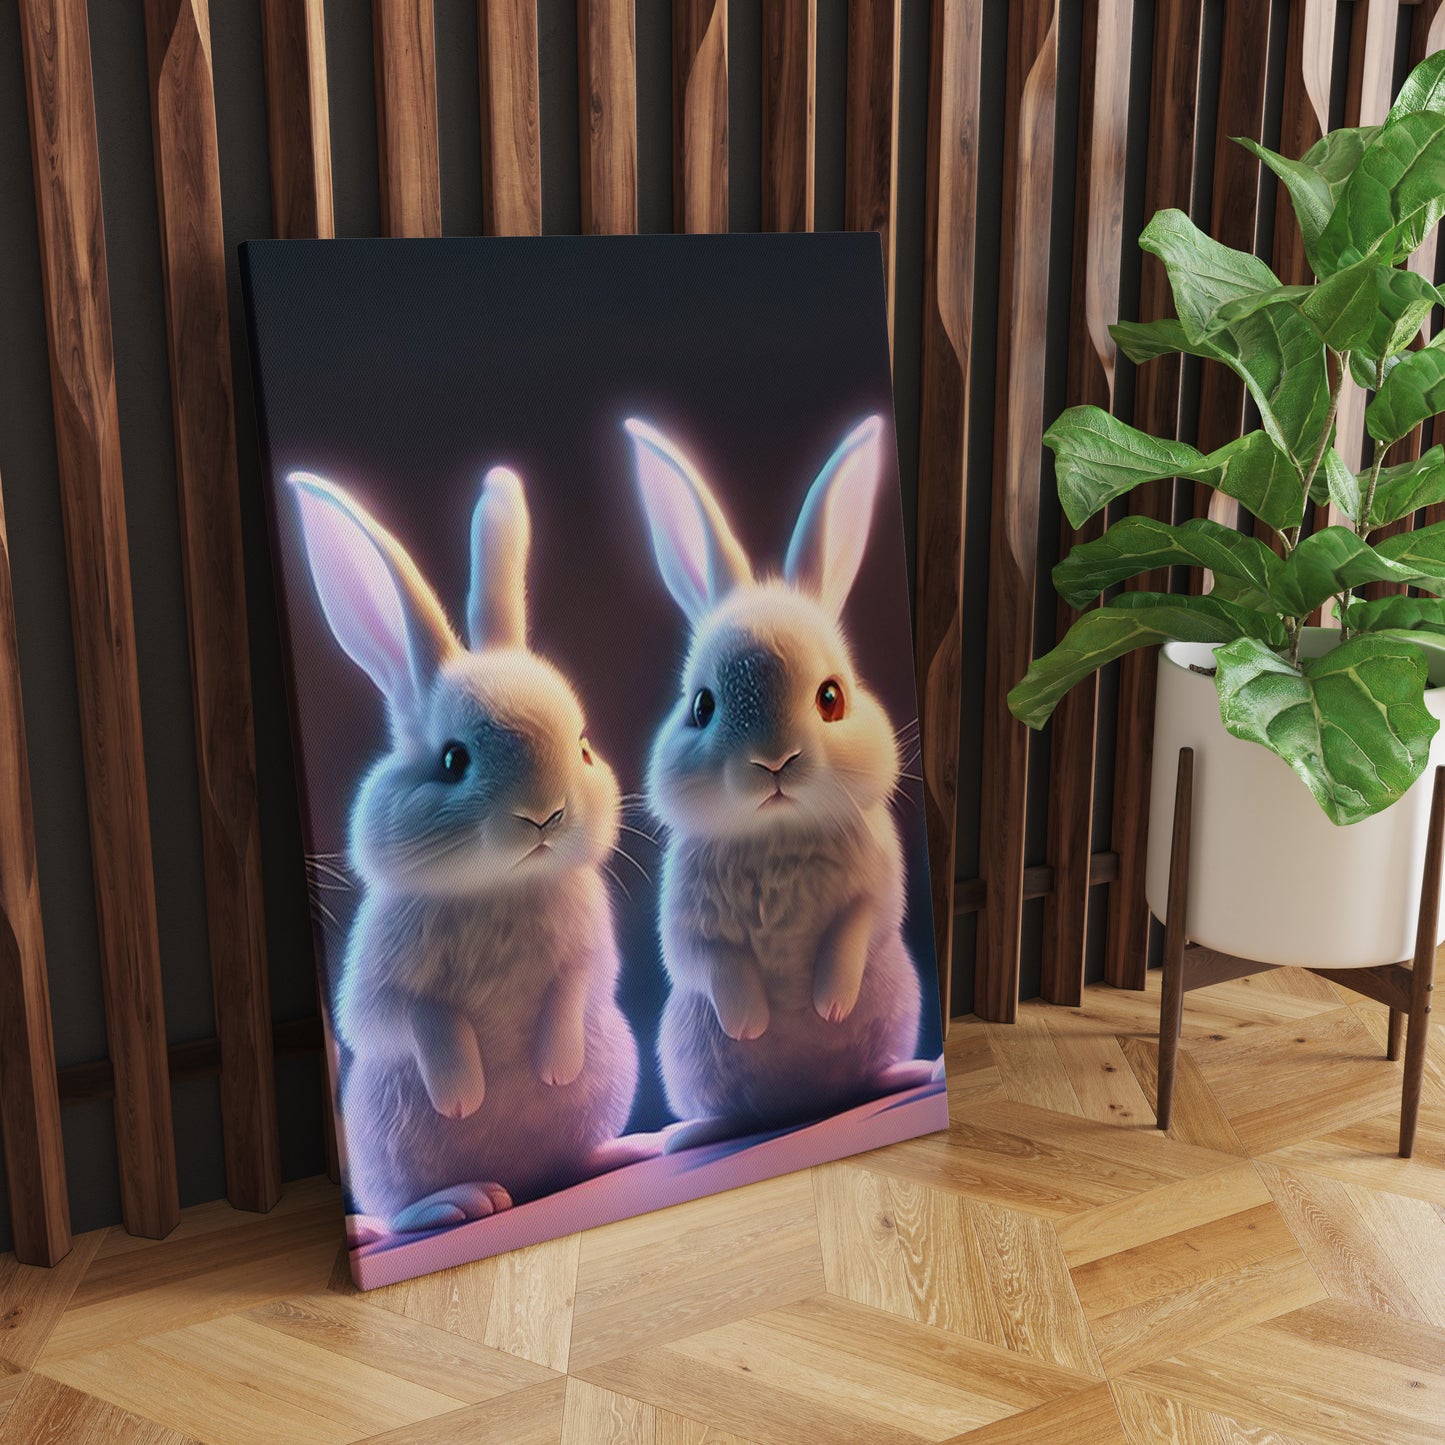 Graceful Hoppers: A Captivating Wall Art Celebrating the Elegance and Playfulness of Rabbits - S06E05